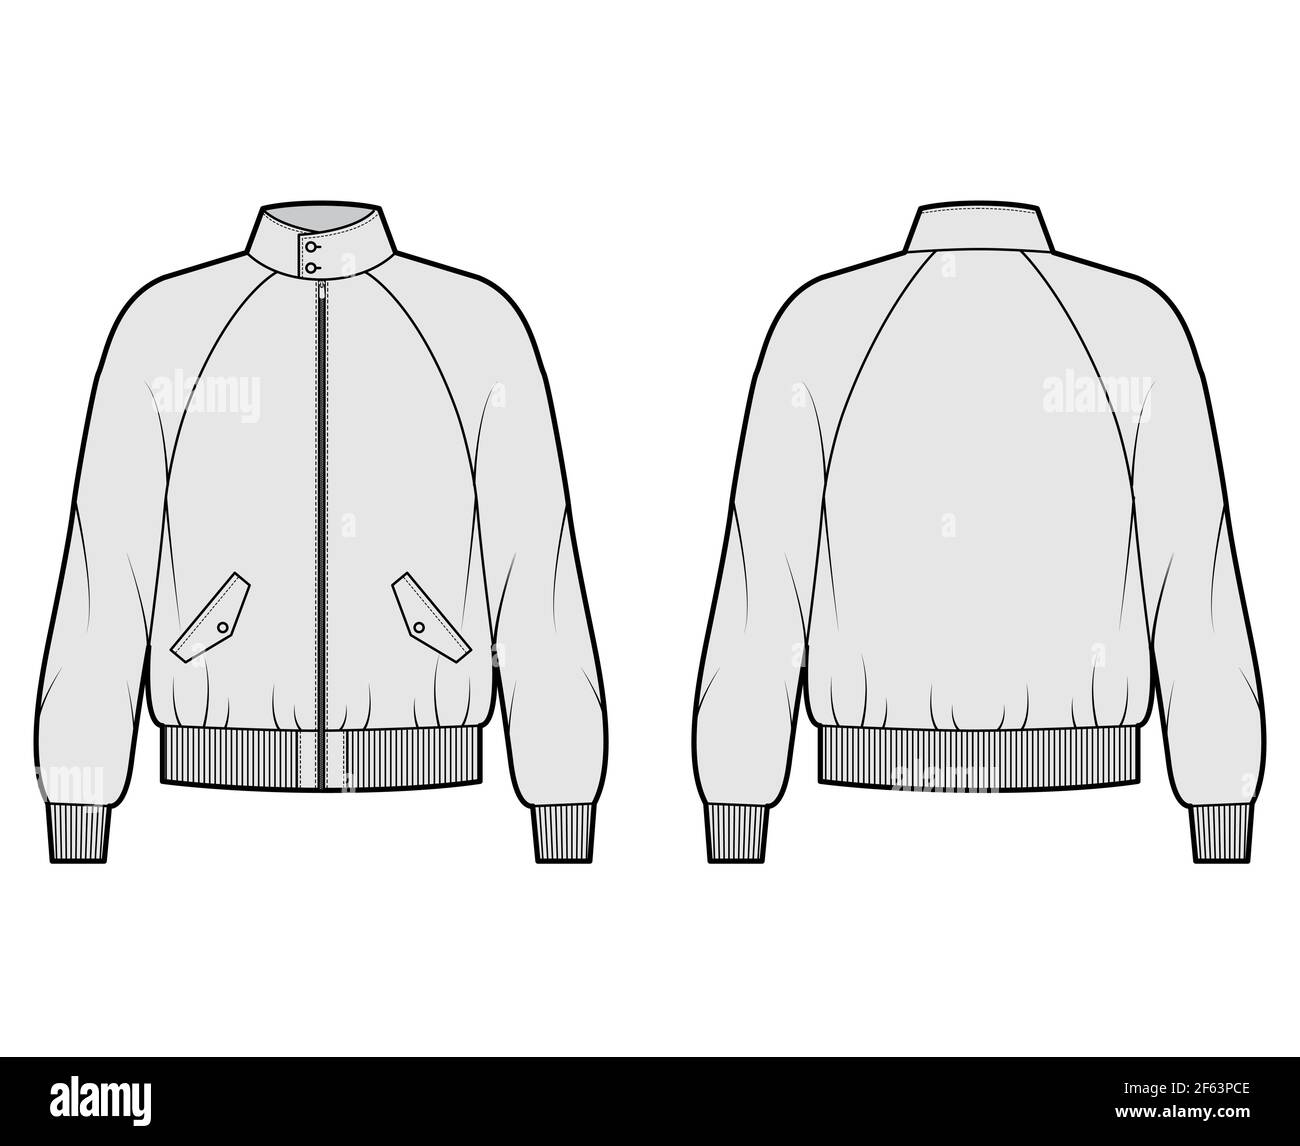 Zip-up Harrington Bomber jacket technical fashion illustration with Rib cuffs, waistband, oversized, flap pockets. Flat coat template front, back, grey color. Women men unisex top CAD mockup Stock Vector